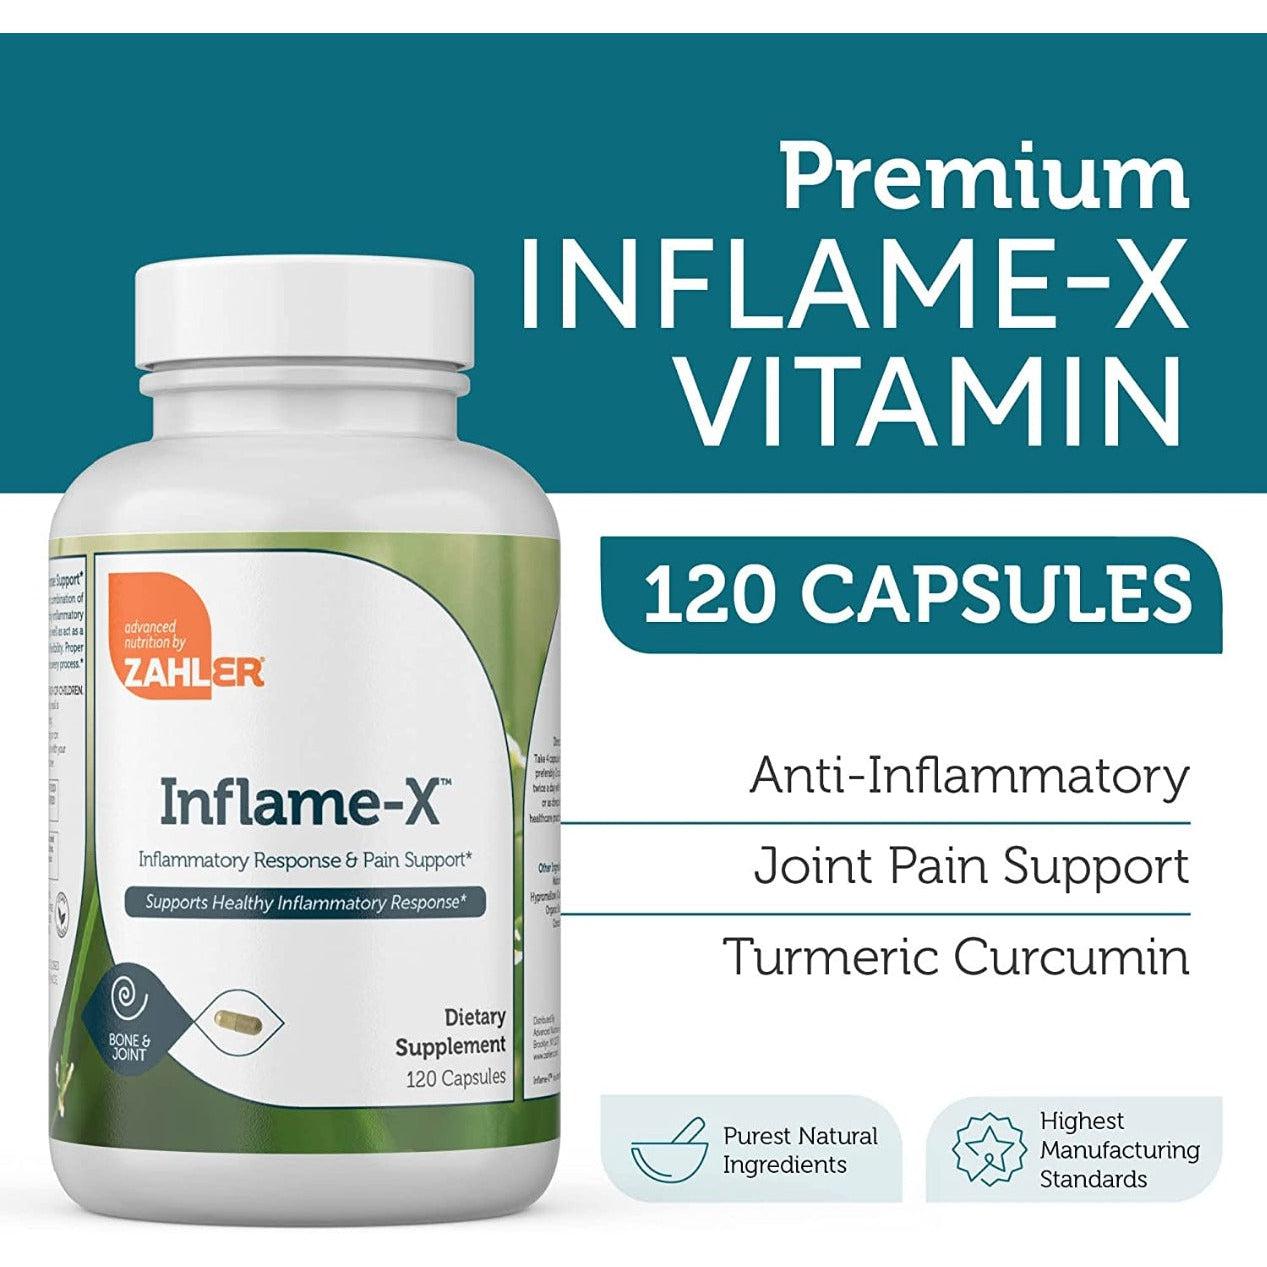 Advanced Nutrition by ZAHLER Inflame-X Advanced Inflammatory Response Support with Curcumin 120 vegan capsules